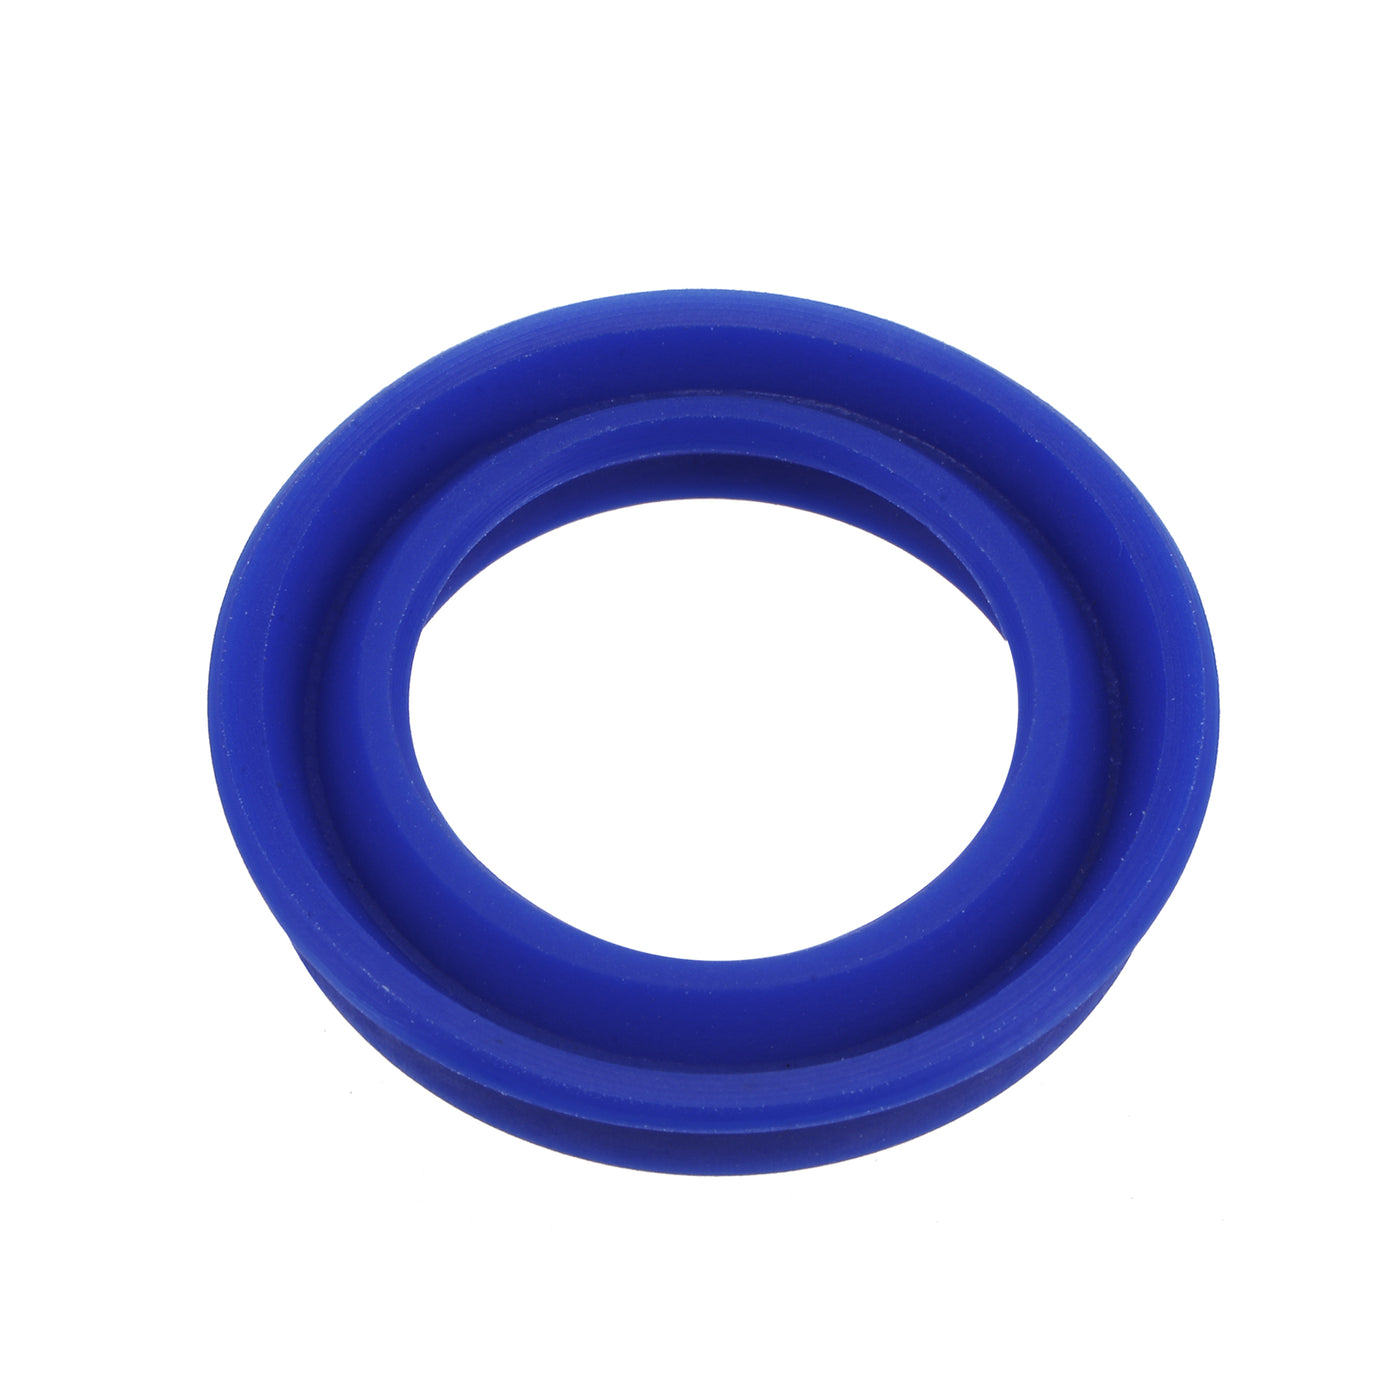 uxcell Uxcell UN Radial Shaft Seal 18mm ID x 25mm OD x 5mm Width PU Oil Seal, Blue Pack of 5